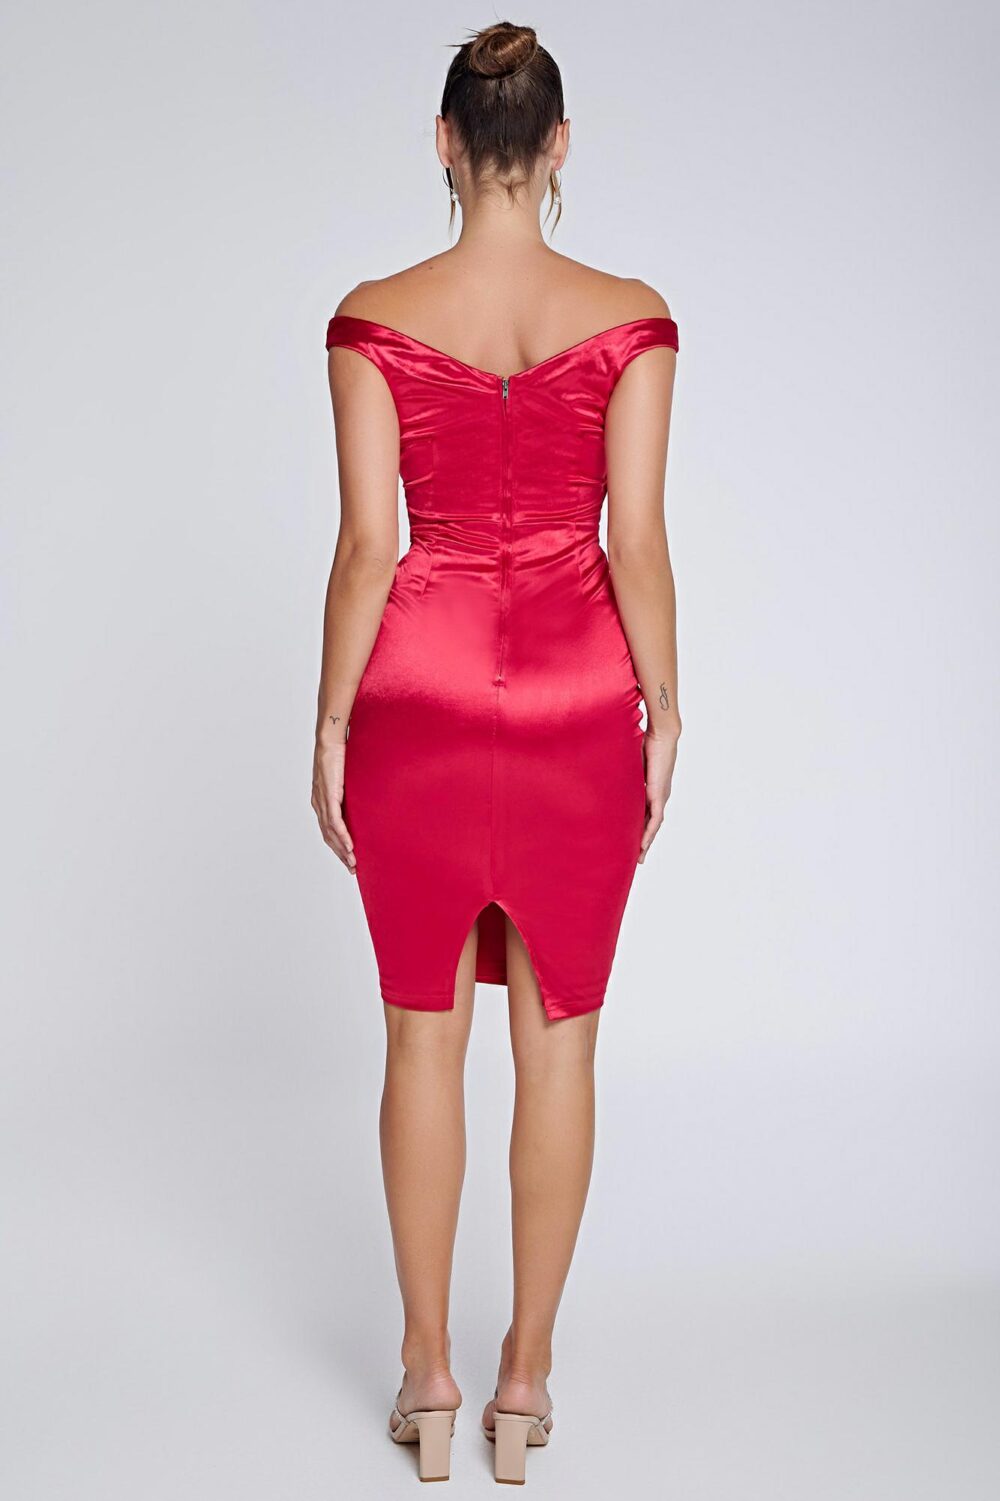 Ladies Dress Colour is Red